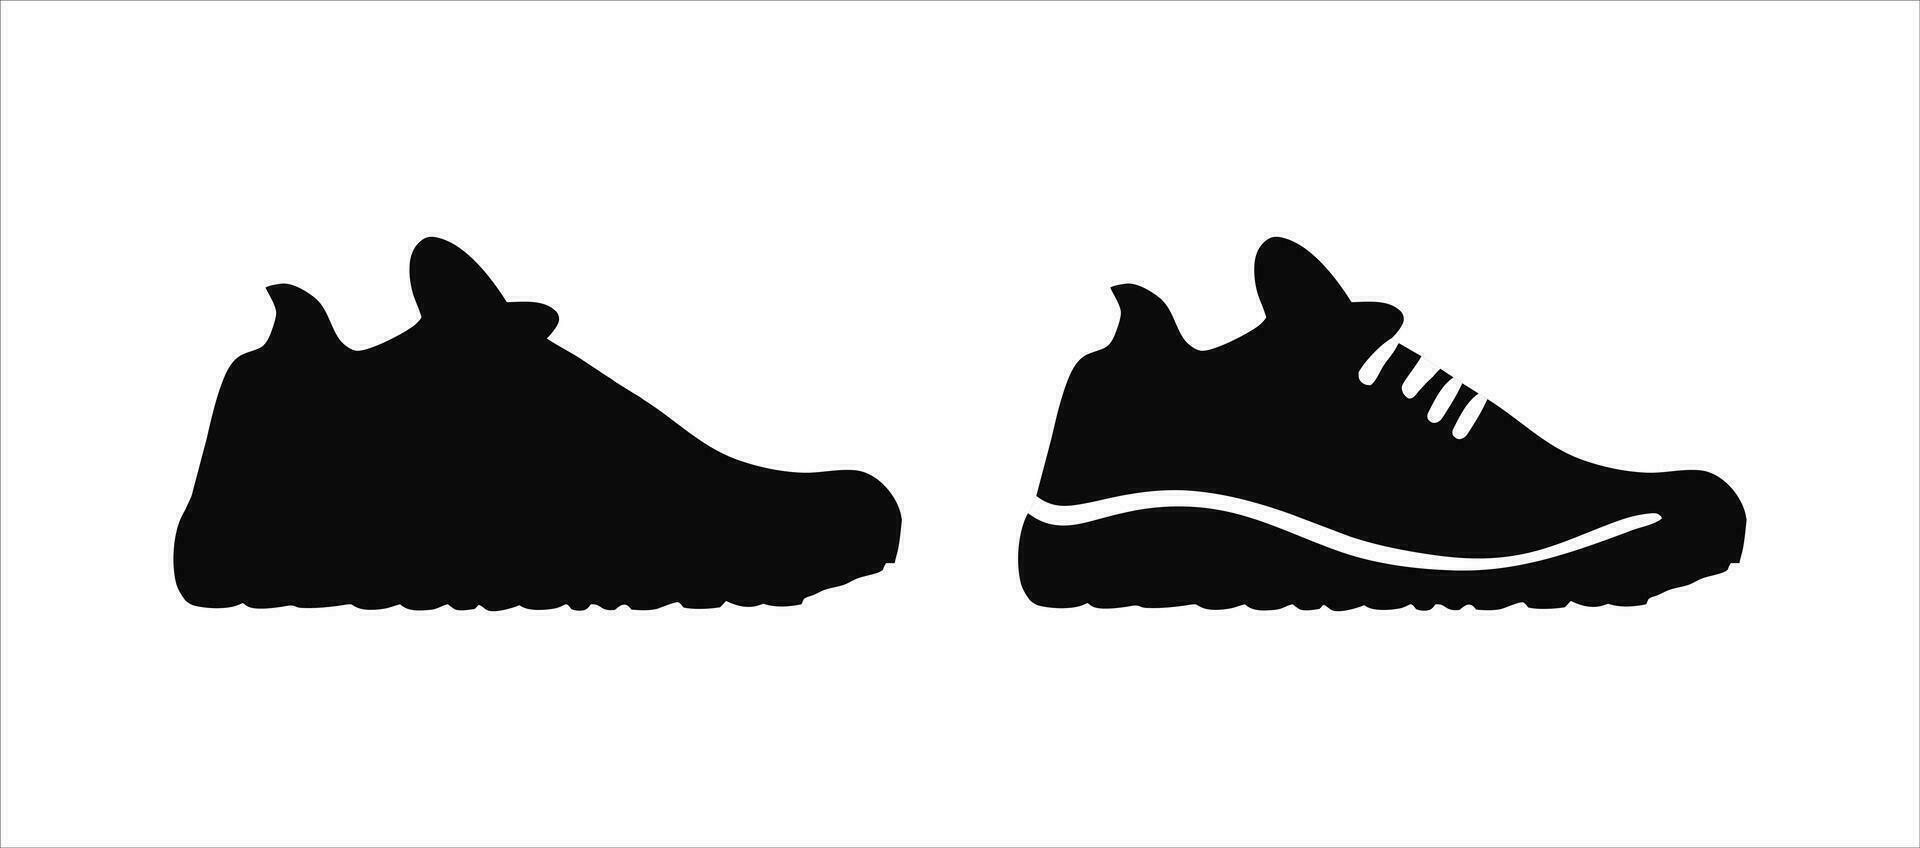 Sneaker. Black and white icon, silhouette. Vector illustration isolated on white background. Shoes for sports. Simple flat graphics. Design element, pictogram, logo